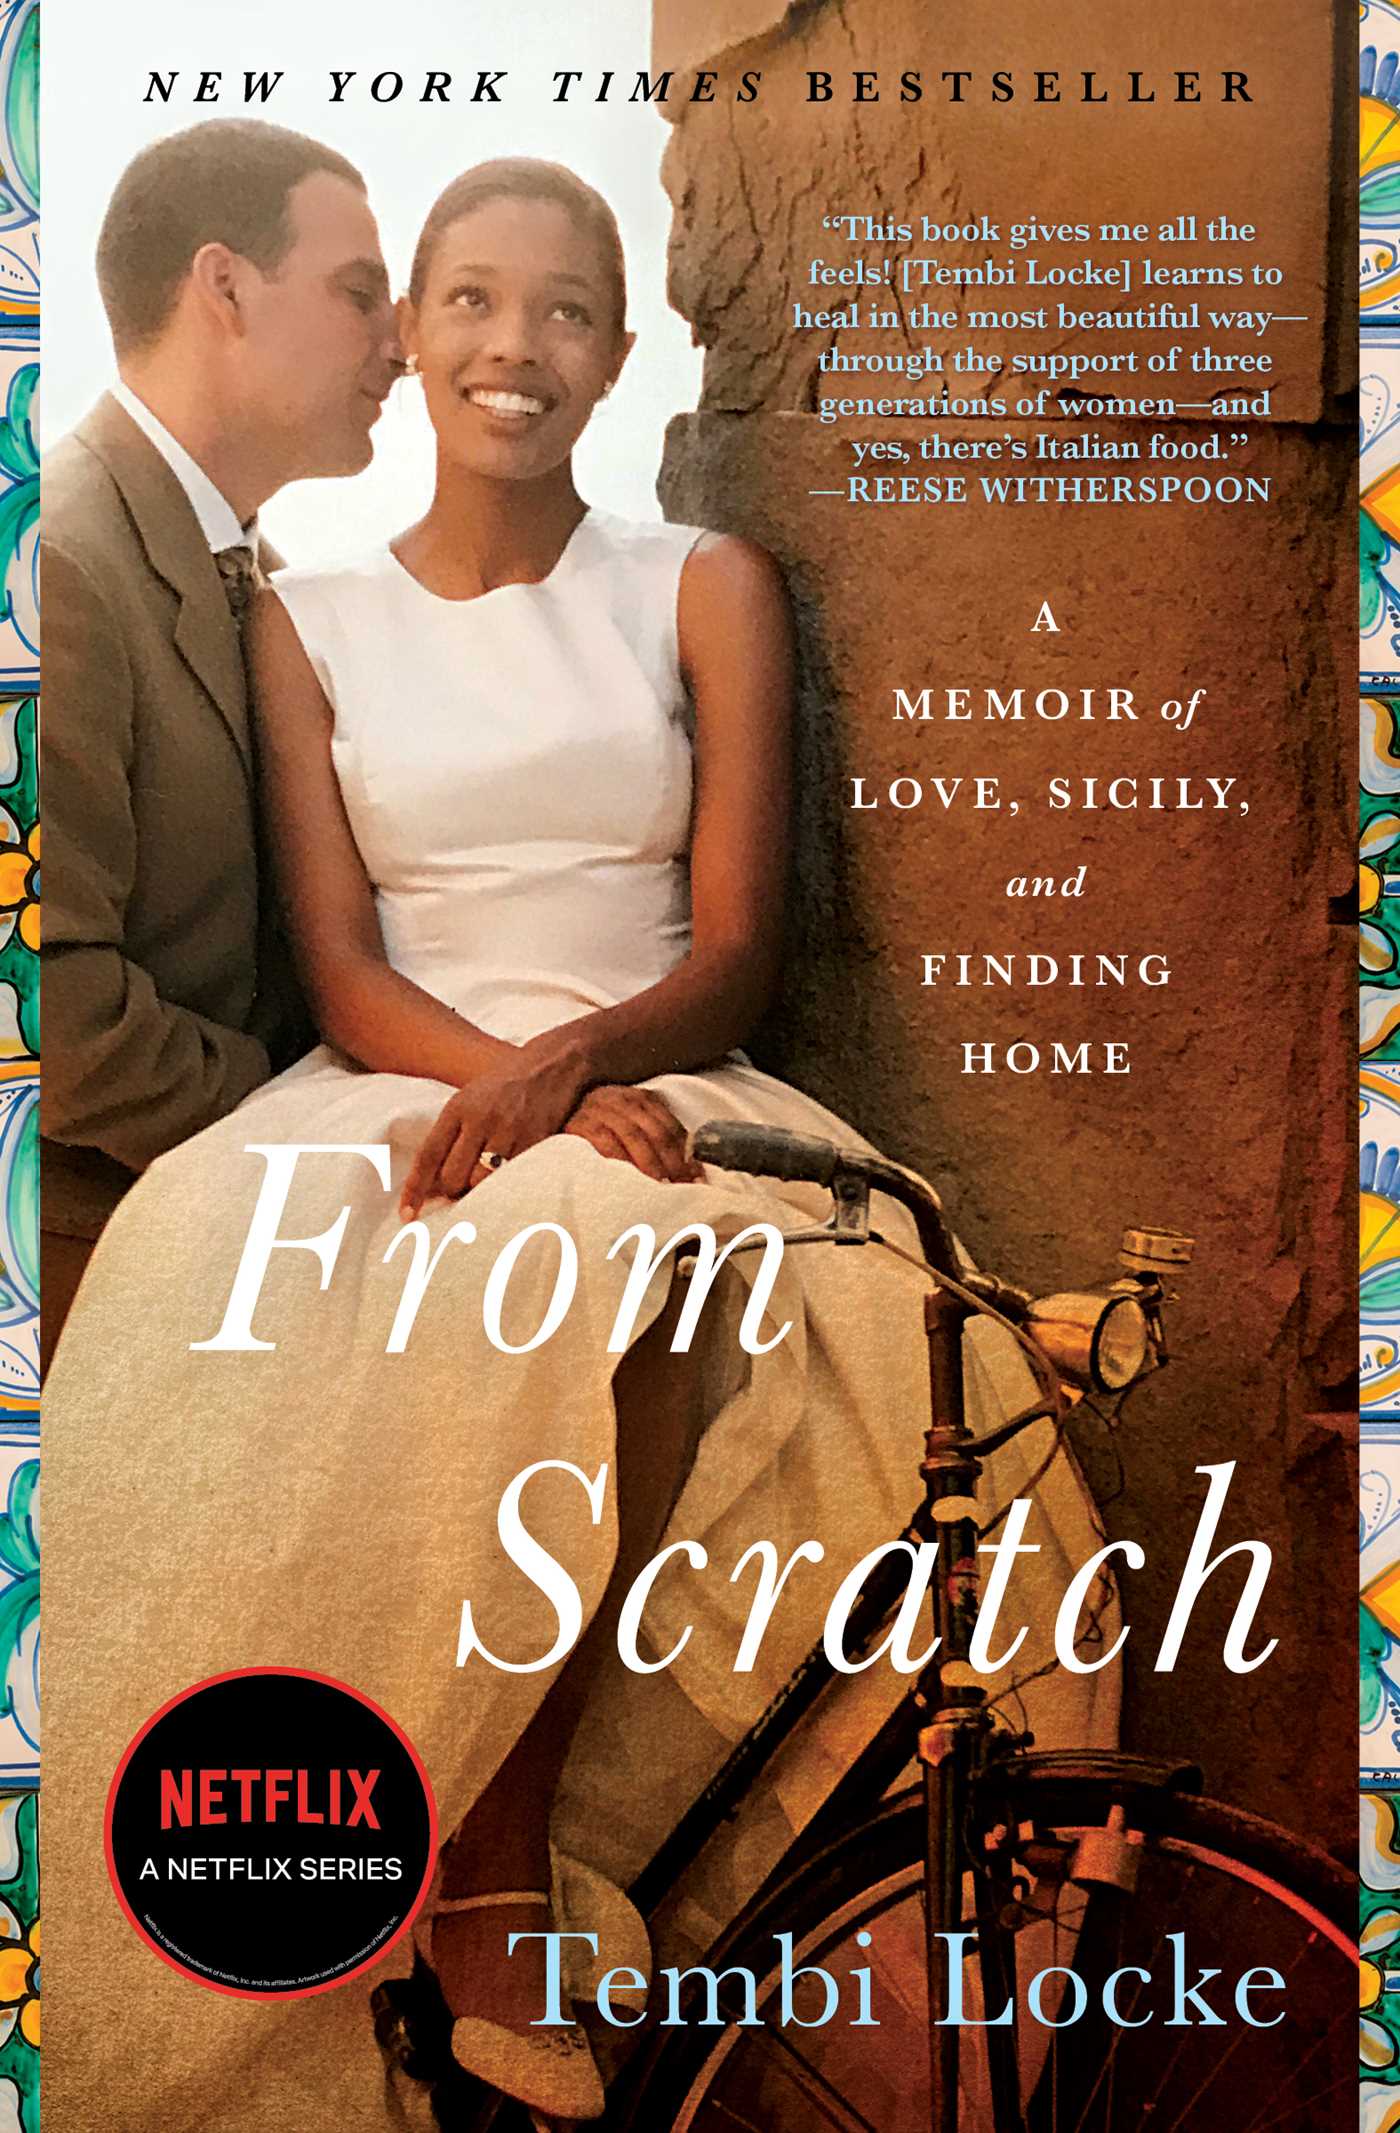 cover of the book "From Scatch" featuring a young couple on the front smiling